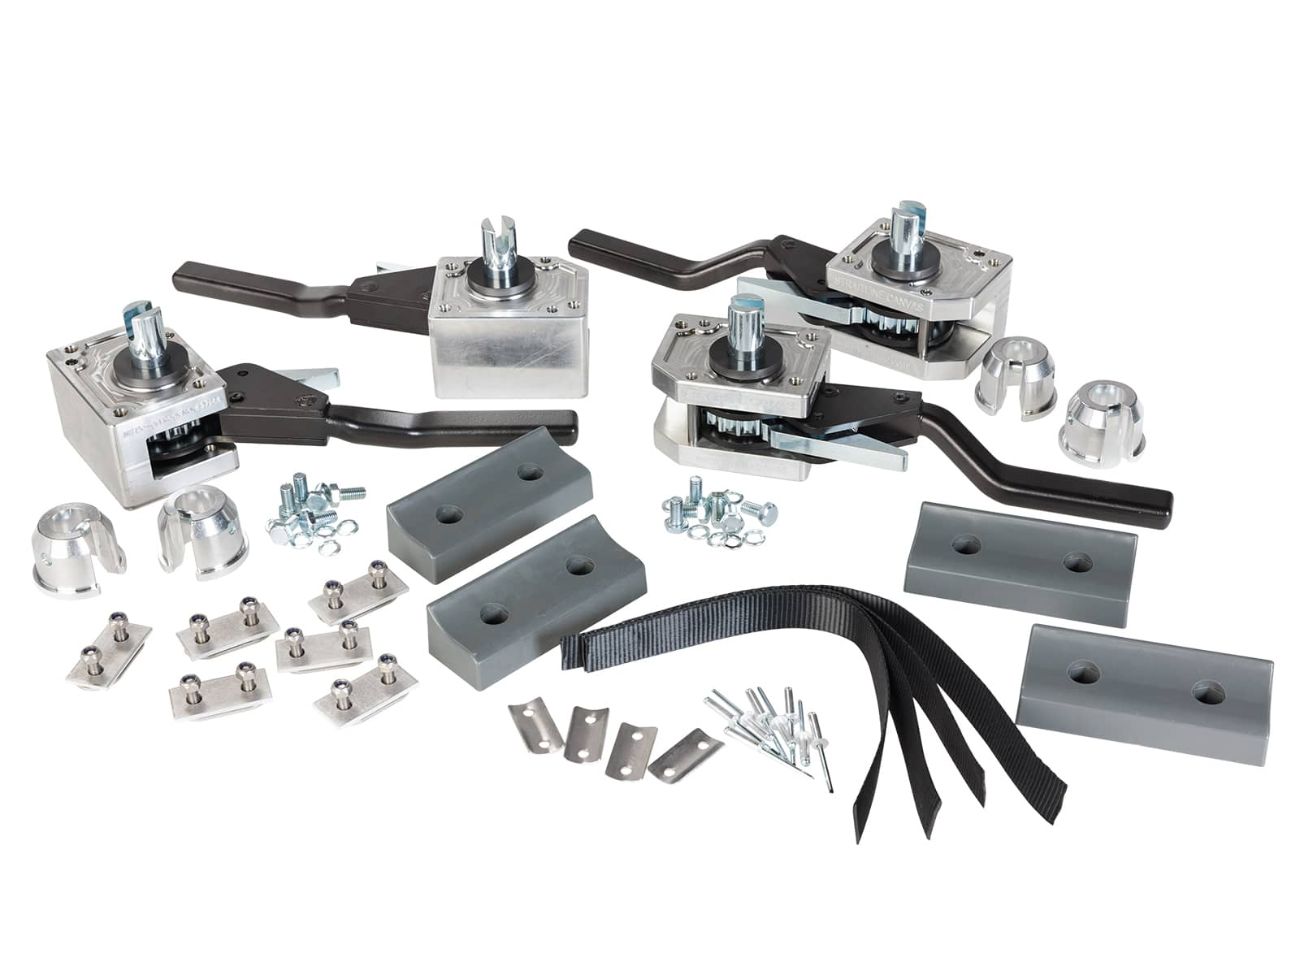 kit of parts needed for truck curtainsider body including tensioners